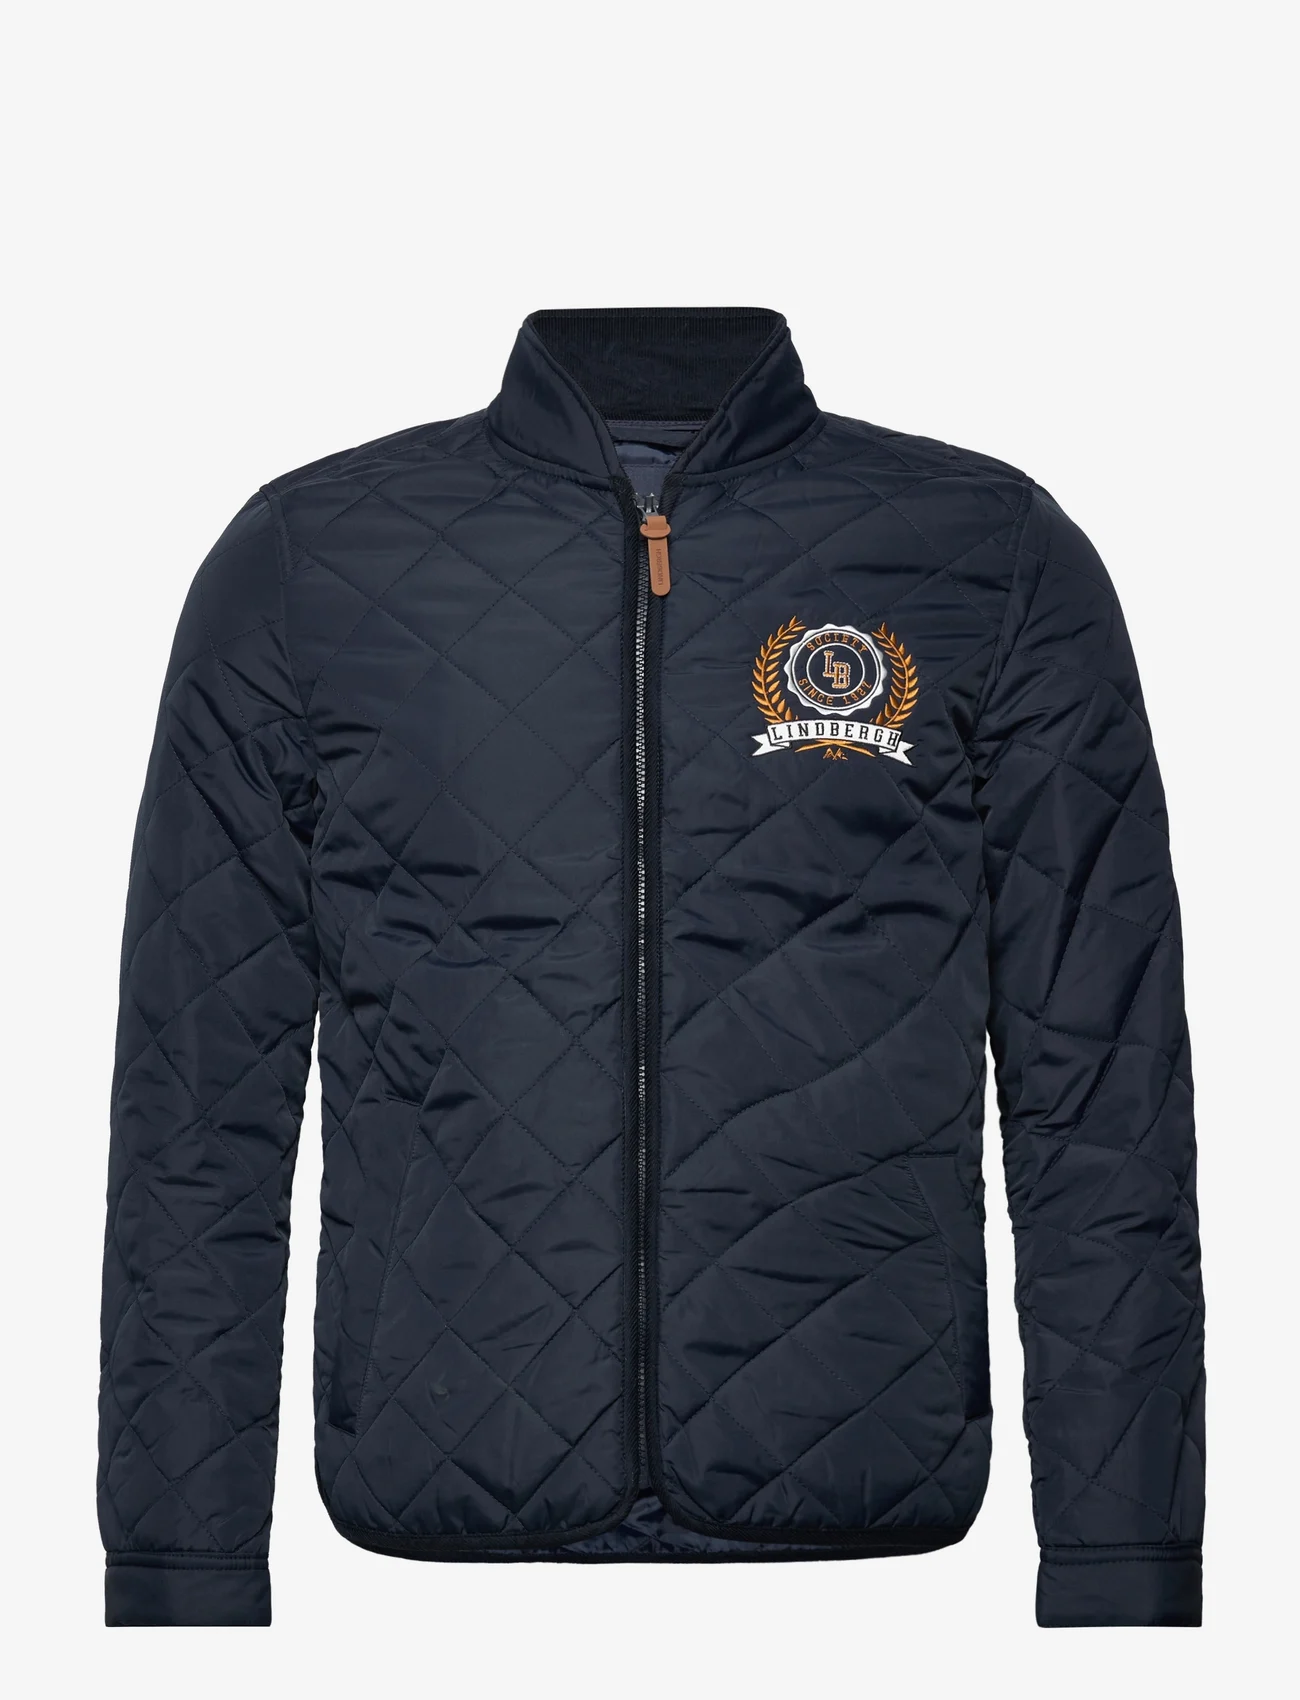 Lindbergh - Quilted city jacket - spring jackets - navy - 0